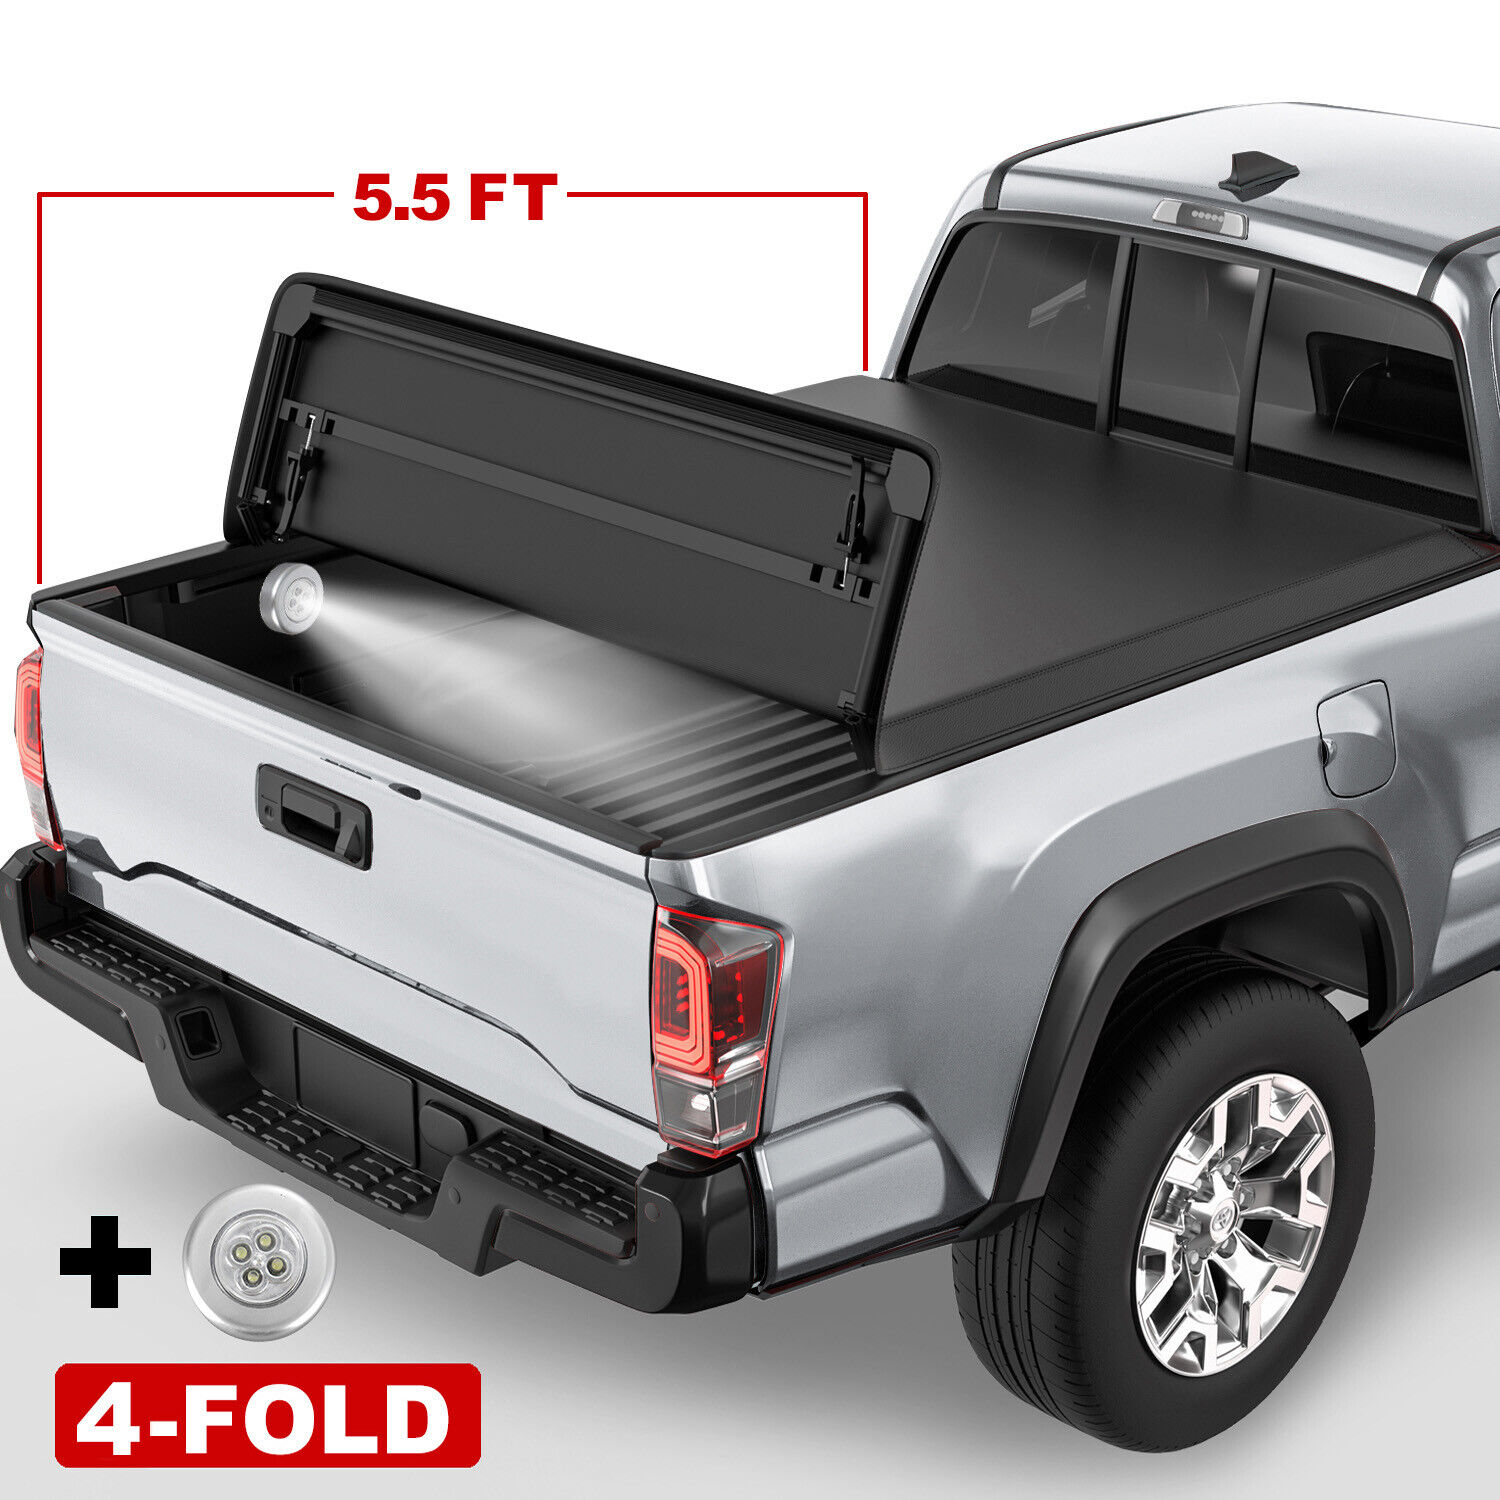 5.5FT 4 Fold Truck Bed Tonneau Cover Soft For 2007-2013 Toyota Tundra Waterproof